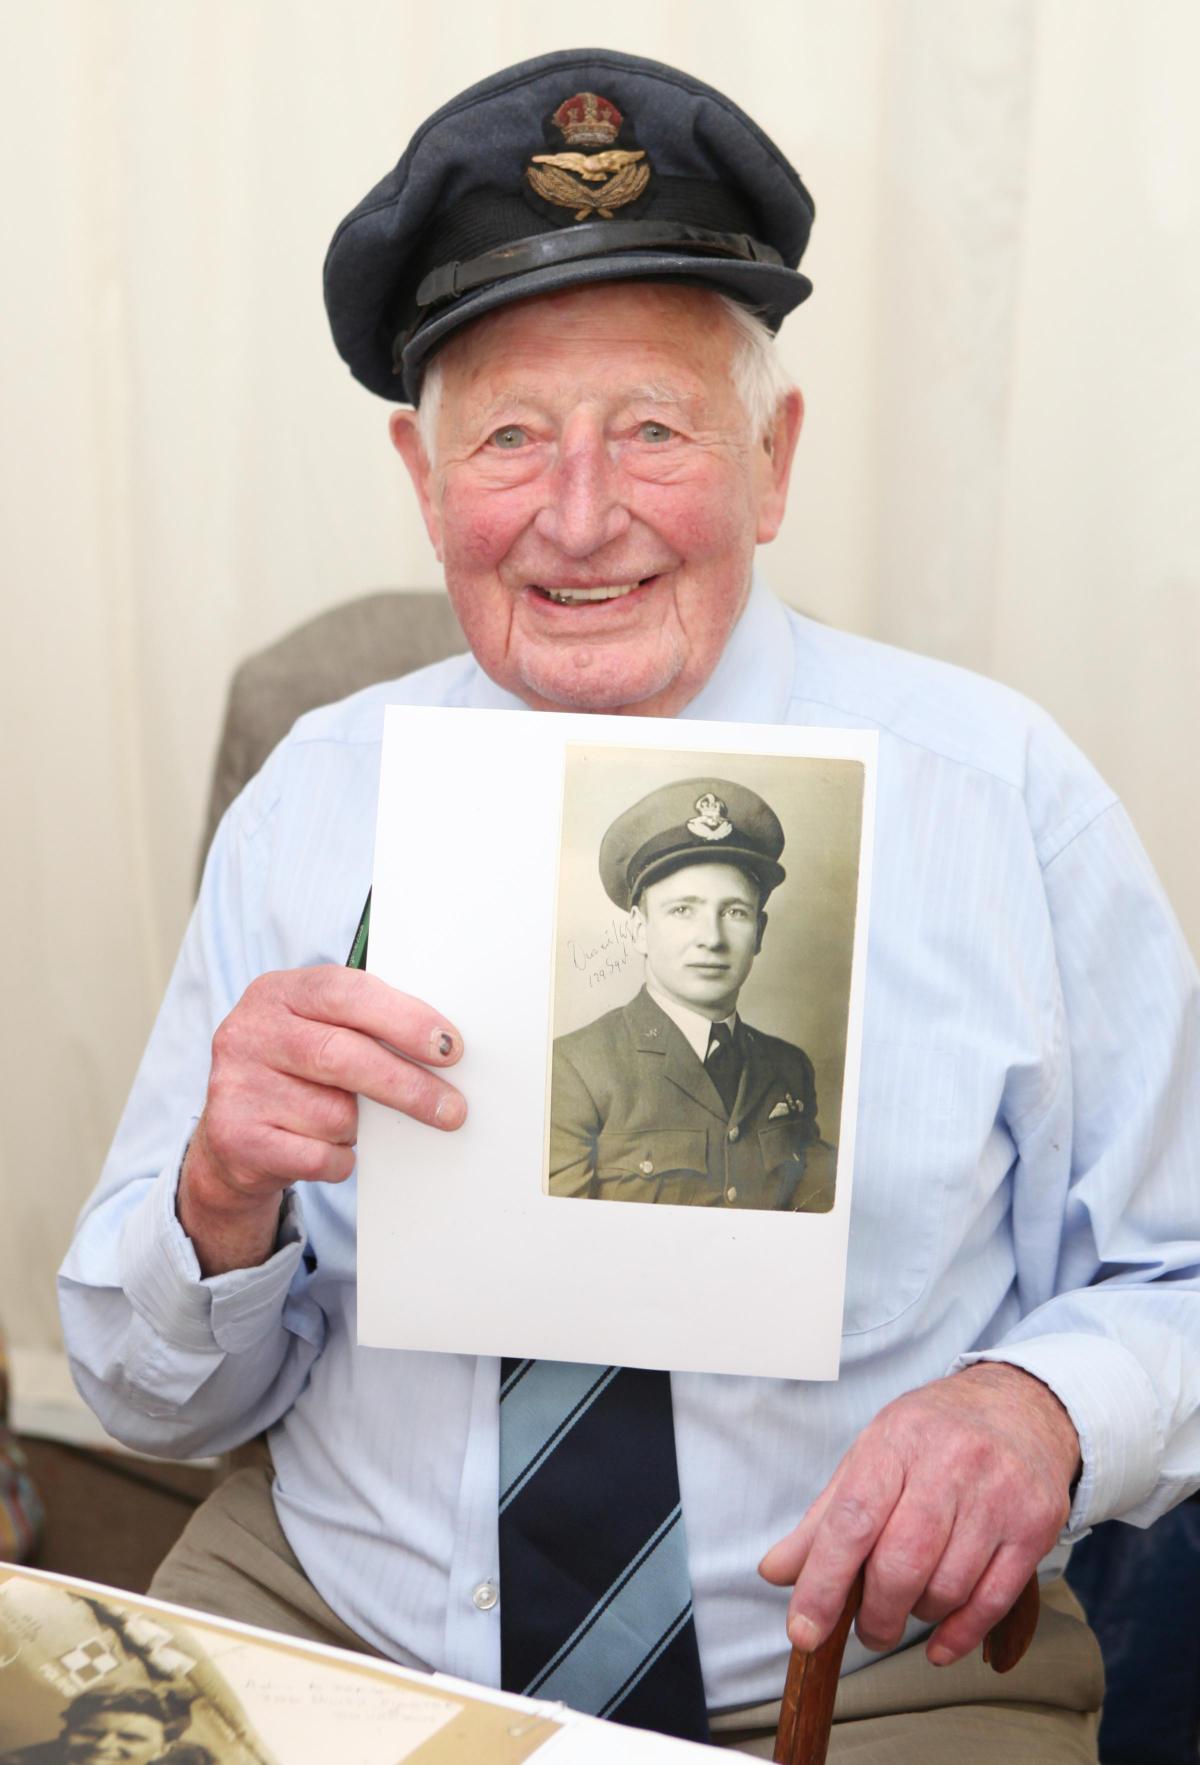 Dennis Keep who was a Spitfire pilot in the war with some pictures of himself